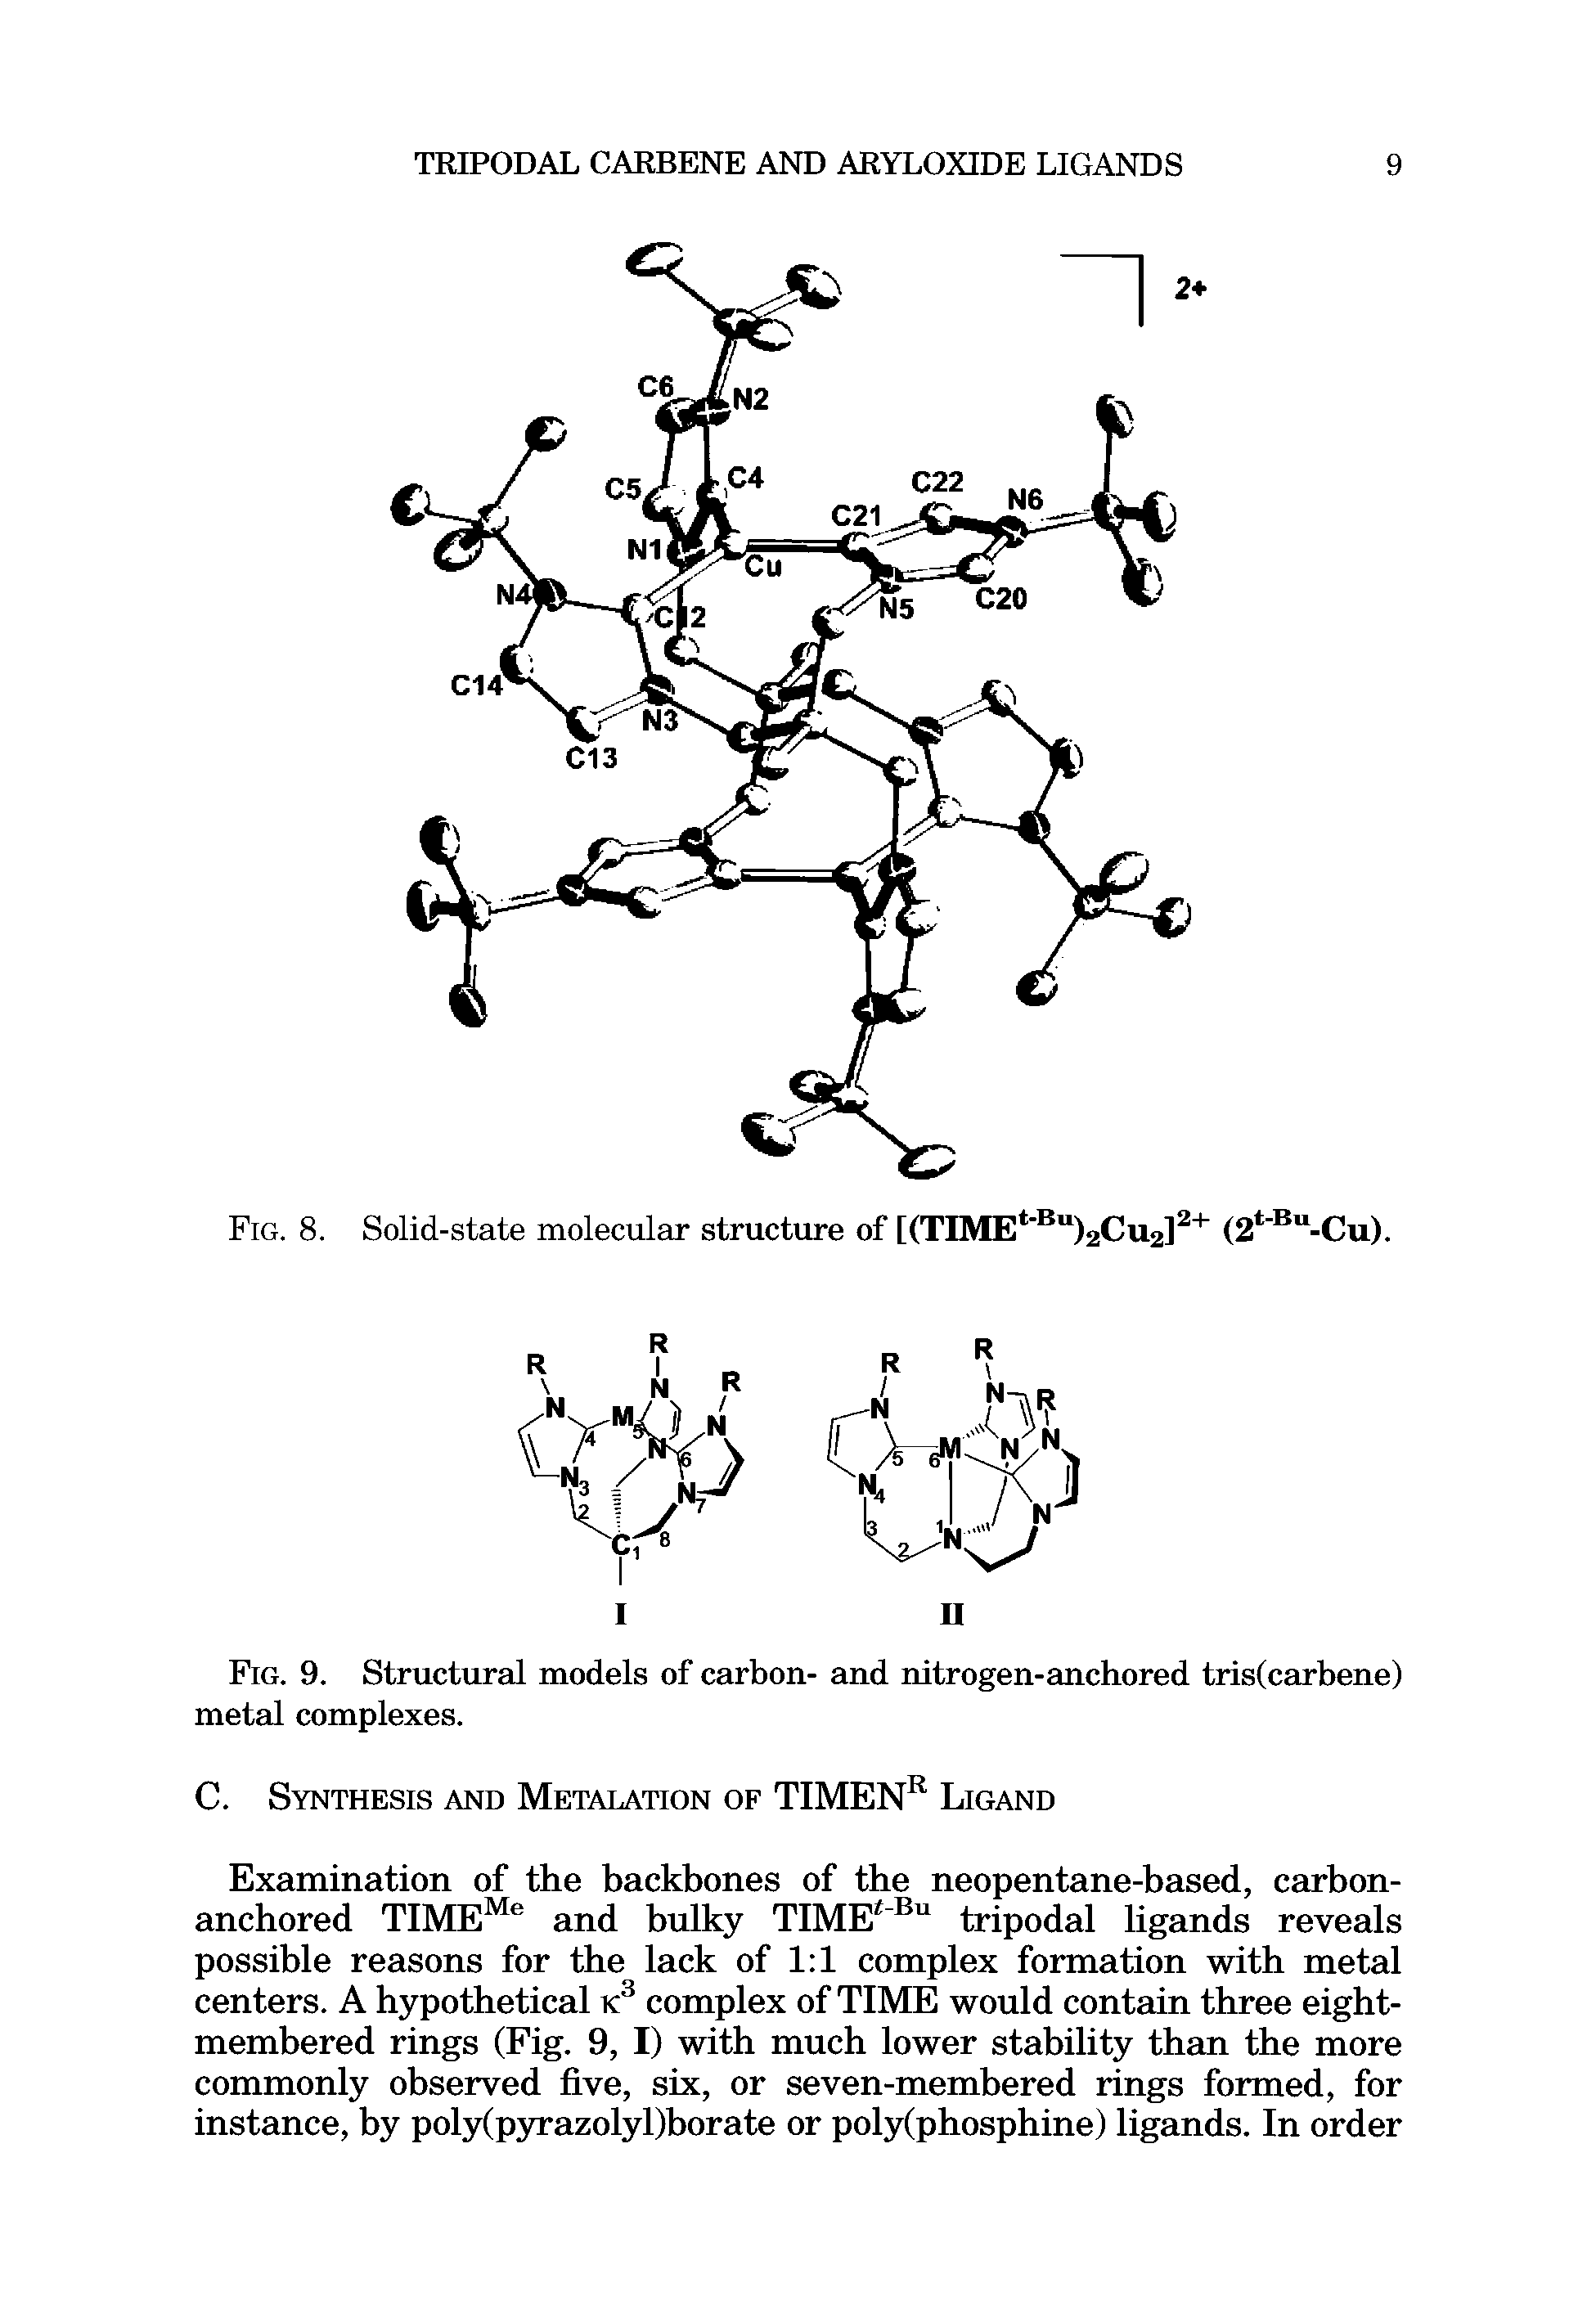 Fig. 9. Structural models of carbon- and nitrogen-anchored tris(carbene) metal complexes.